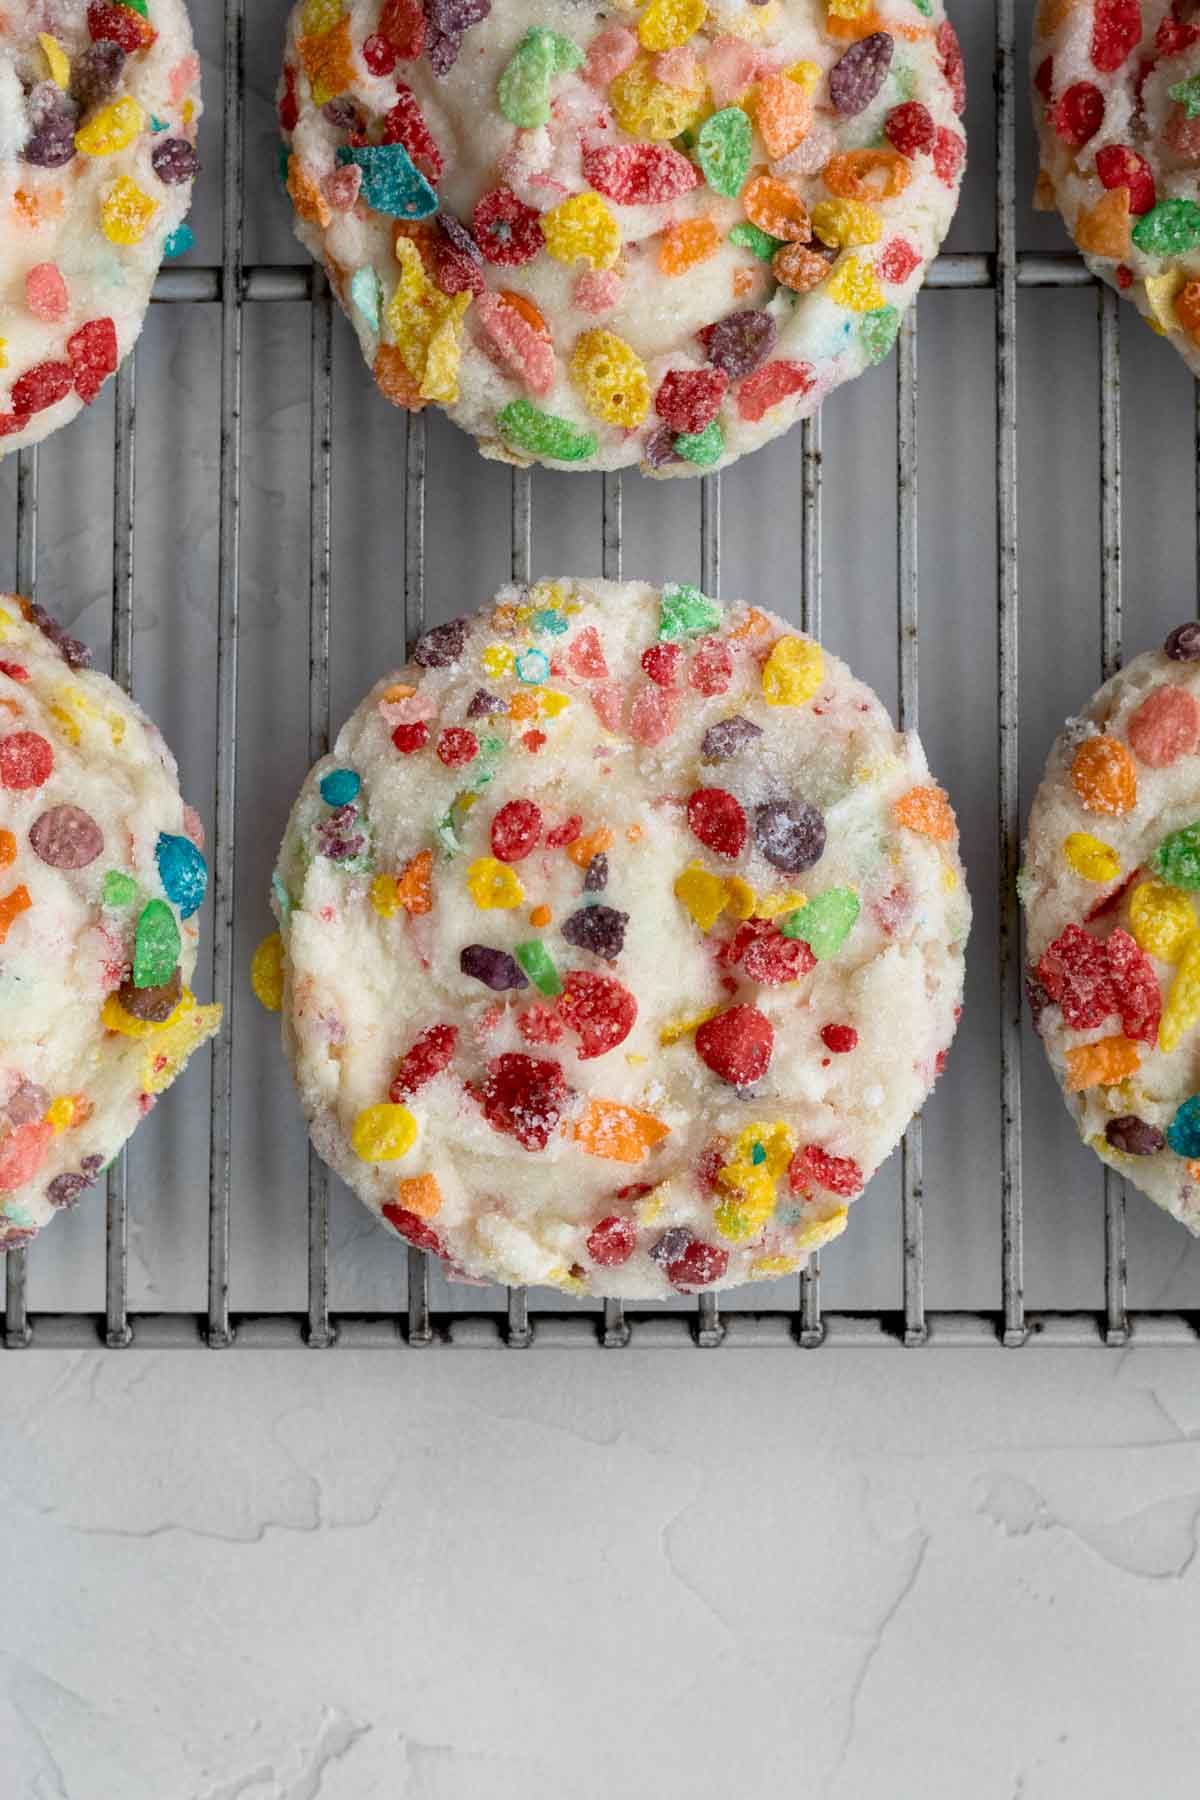 Round warm Fruity Pebbles Cookies on a baking rack.